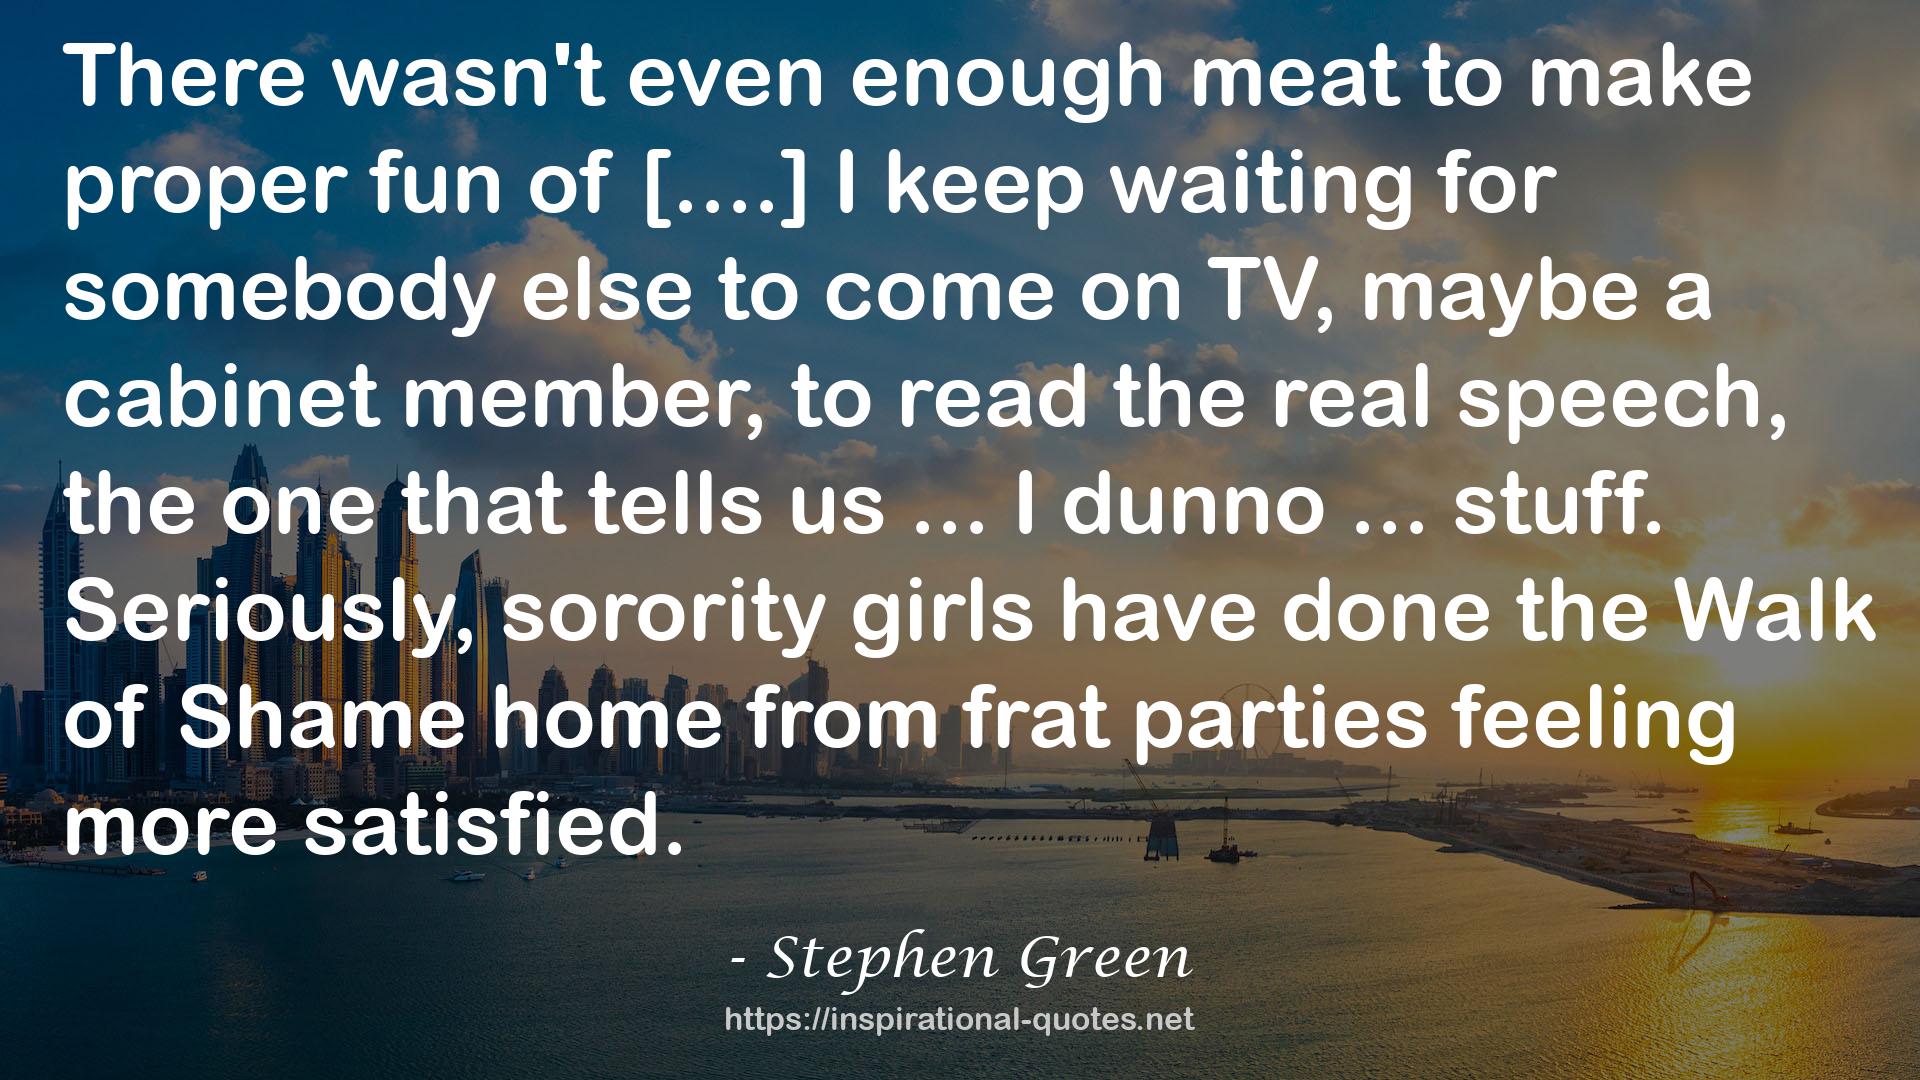 Stephen Green QUOTES